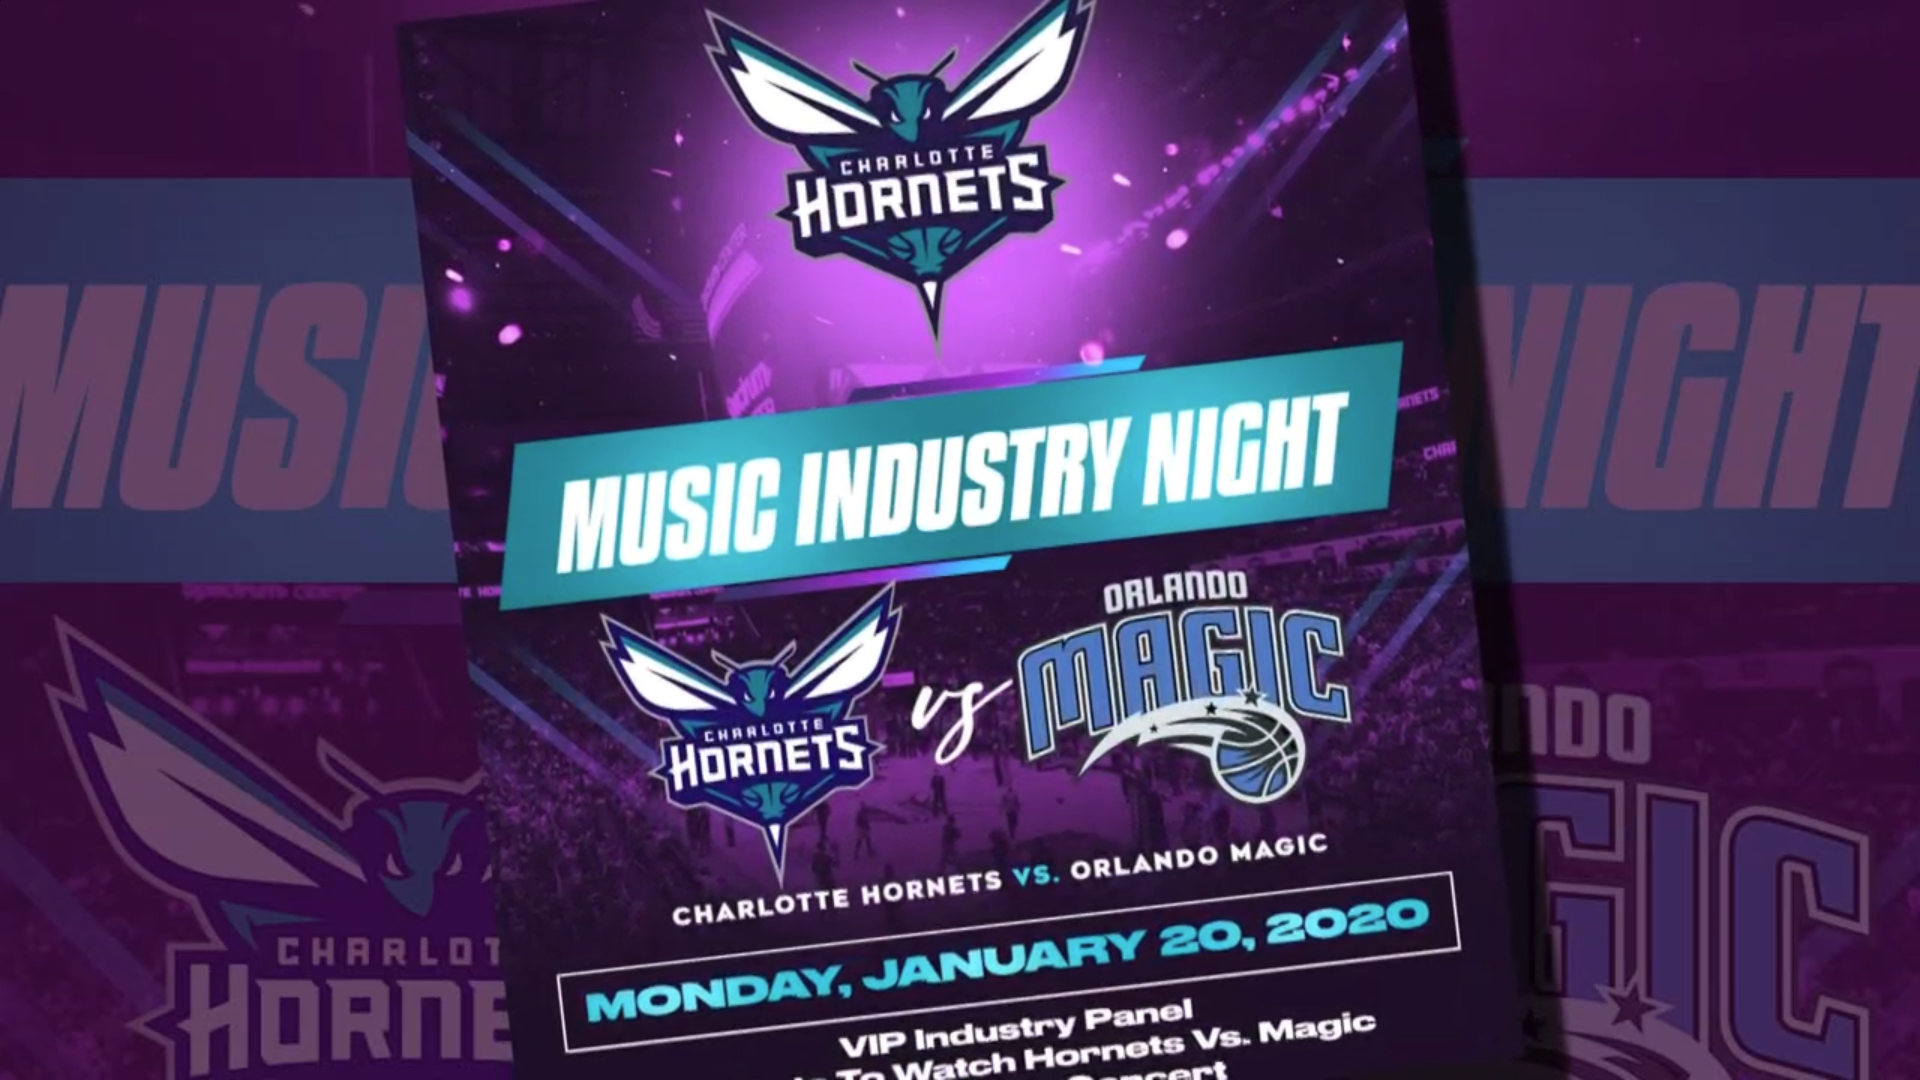 The Hornets will host the NBA's first ever music industry night on Martin Luther King Day, celebrating hip-hop and basketball in the Queen City.